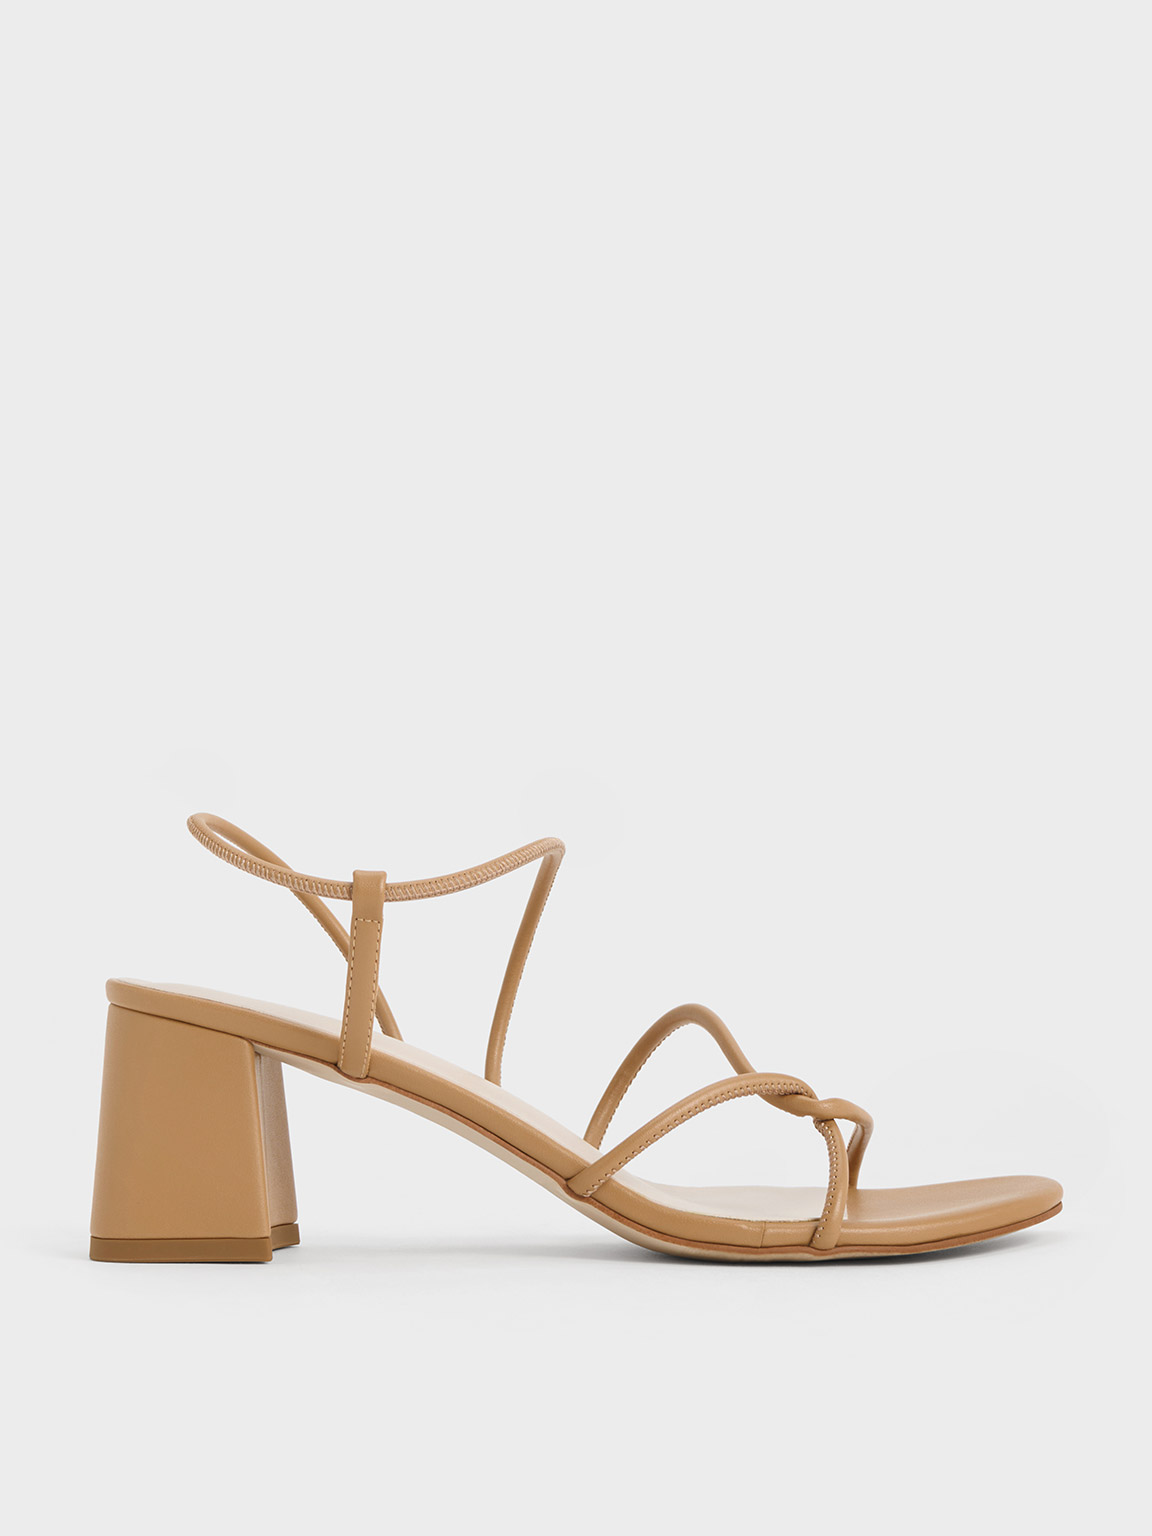 Charles & Keith Meadow Strappy Block Heel Sandals In Camel